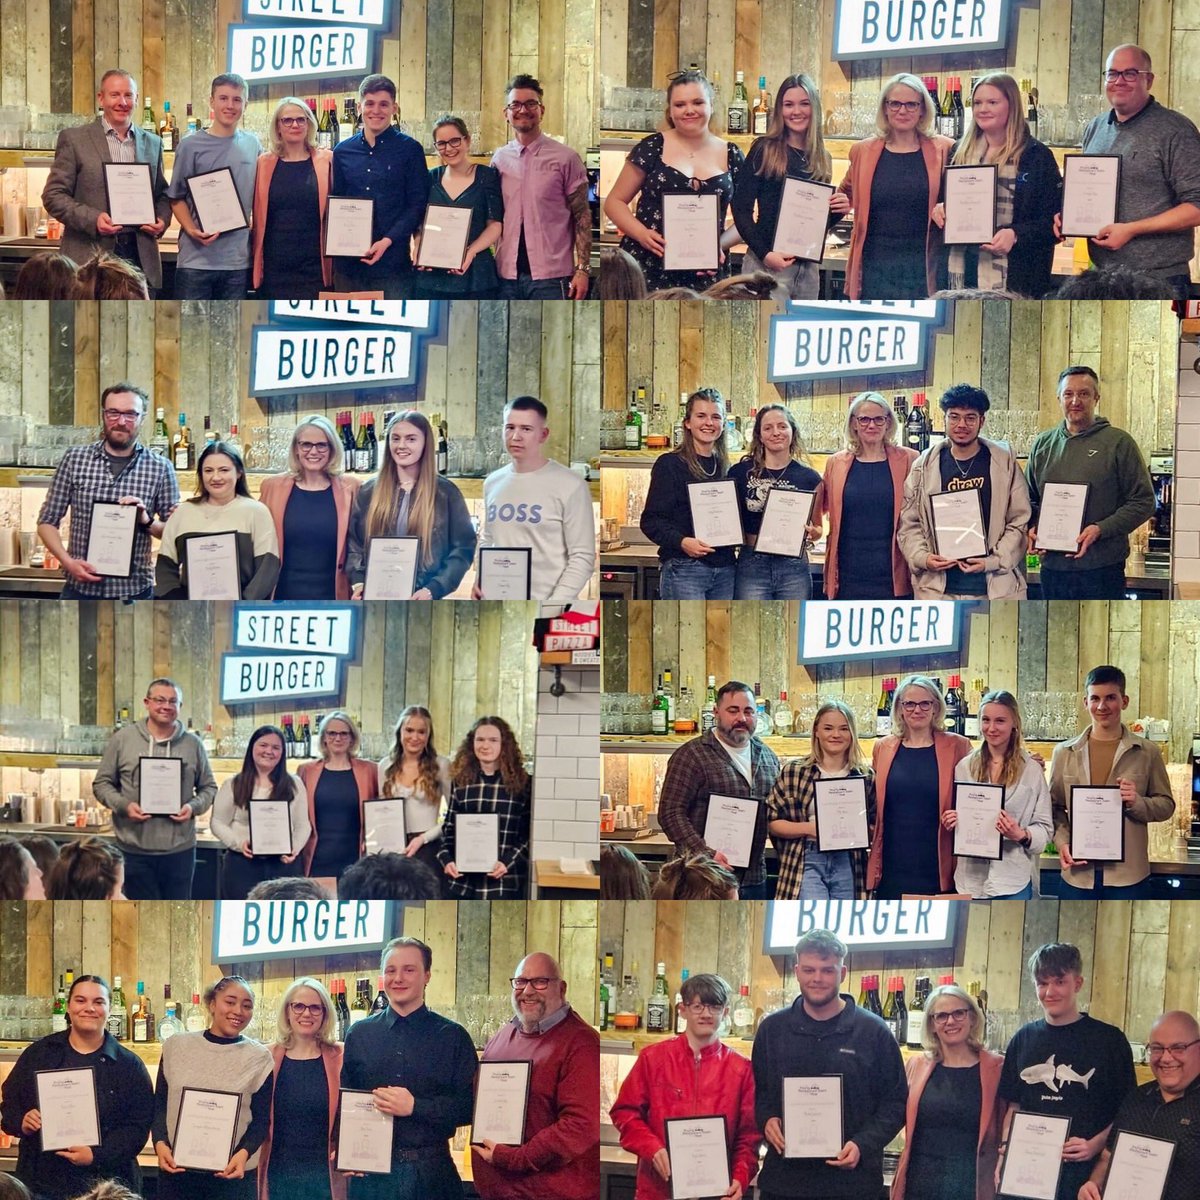 Well done to all the 8 teams who competed in the Semi Finals of @RestaurantYoung UK Young Restaurant Team of the Year held @gracademy on 19 March : @nwslc_official , @Eastleigh_Col , @sheffcol , @Lborocollege , @CheshireCollSW , @bfastmet , @suffolknewcoll , @colegcambria